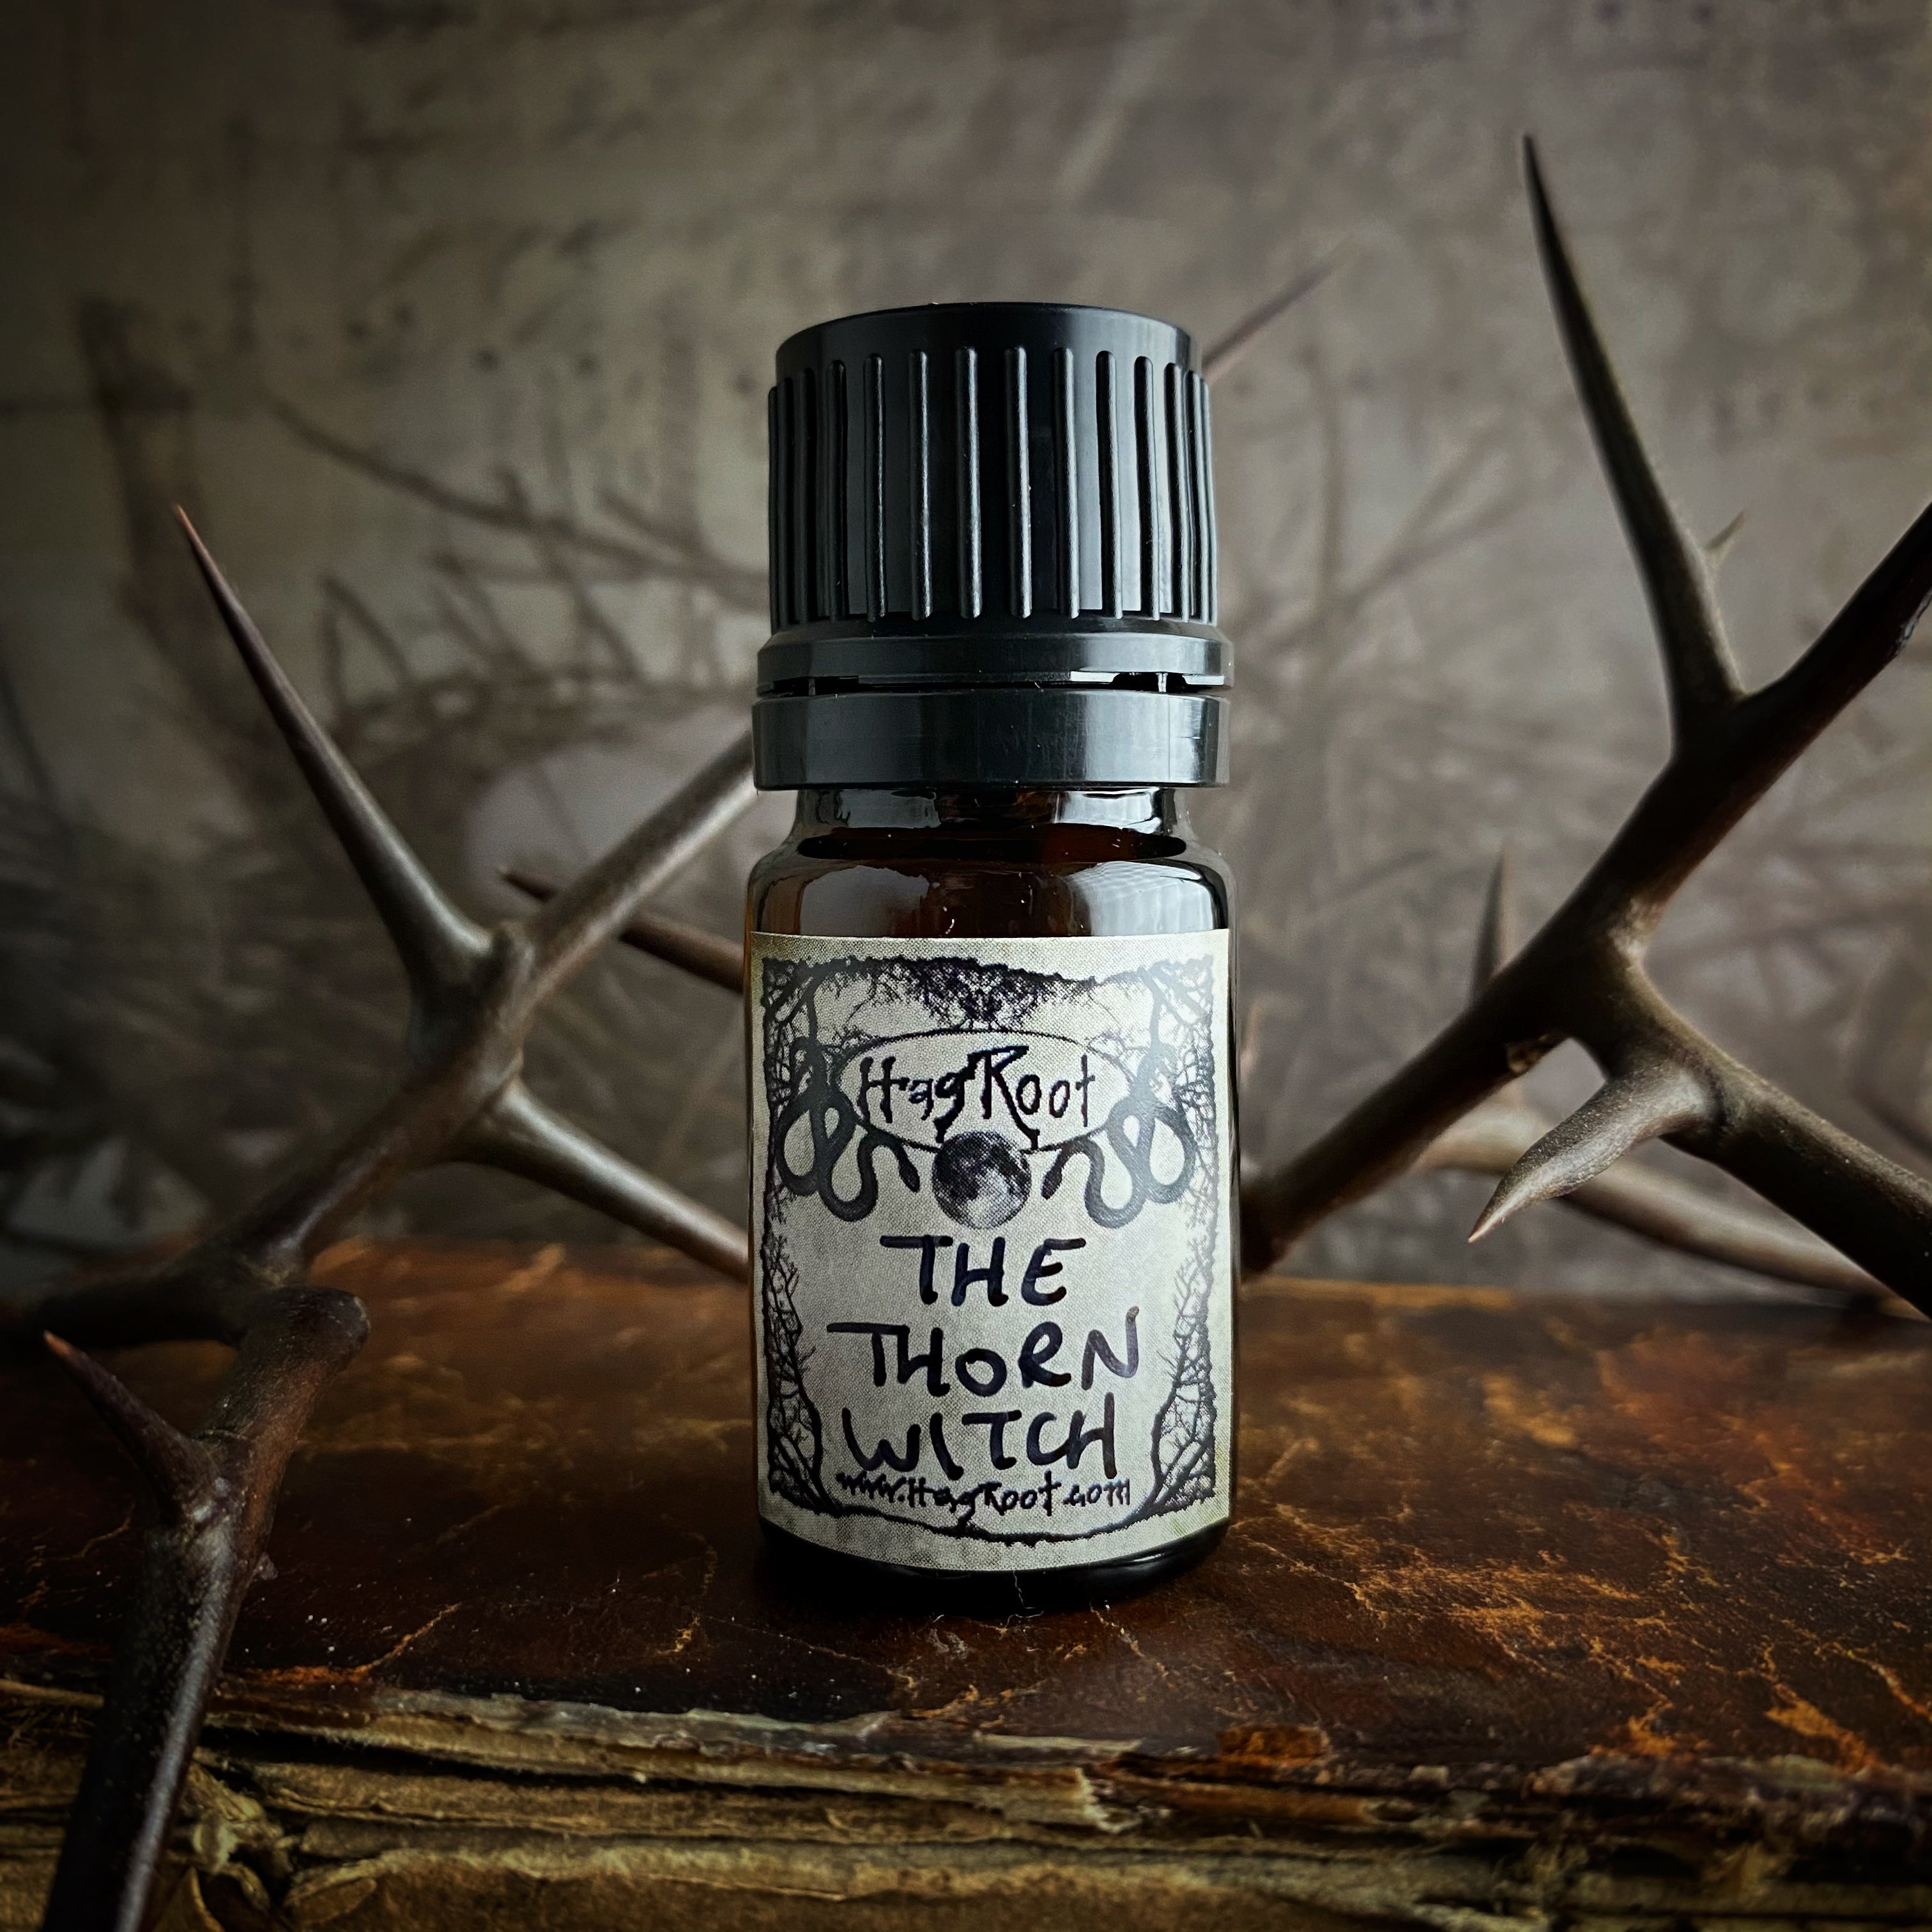 THE THORN WITCH-(Haunted Woods, Dark Spices, Sacred Cacao, Ritual Smoke)-Perfume, Cologne, Anointing, Ritual Oil